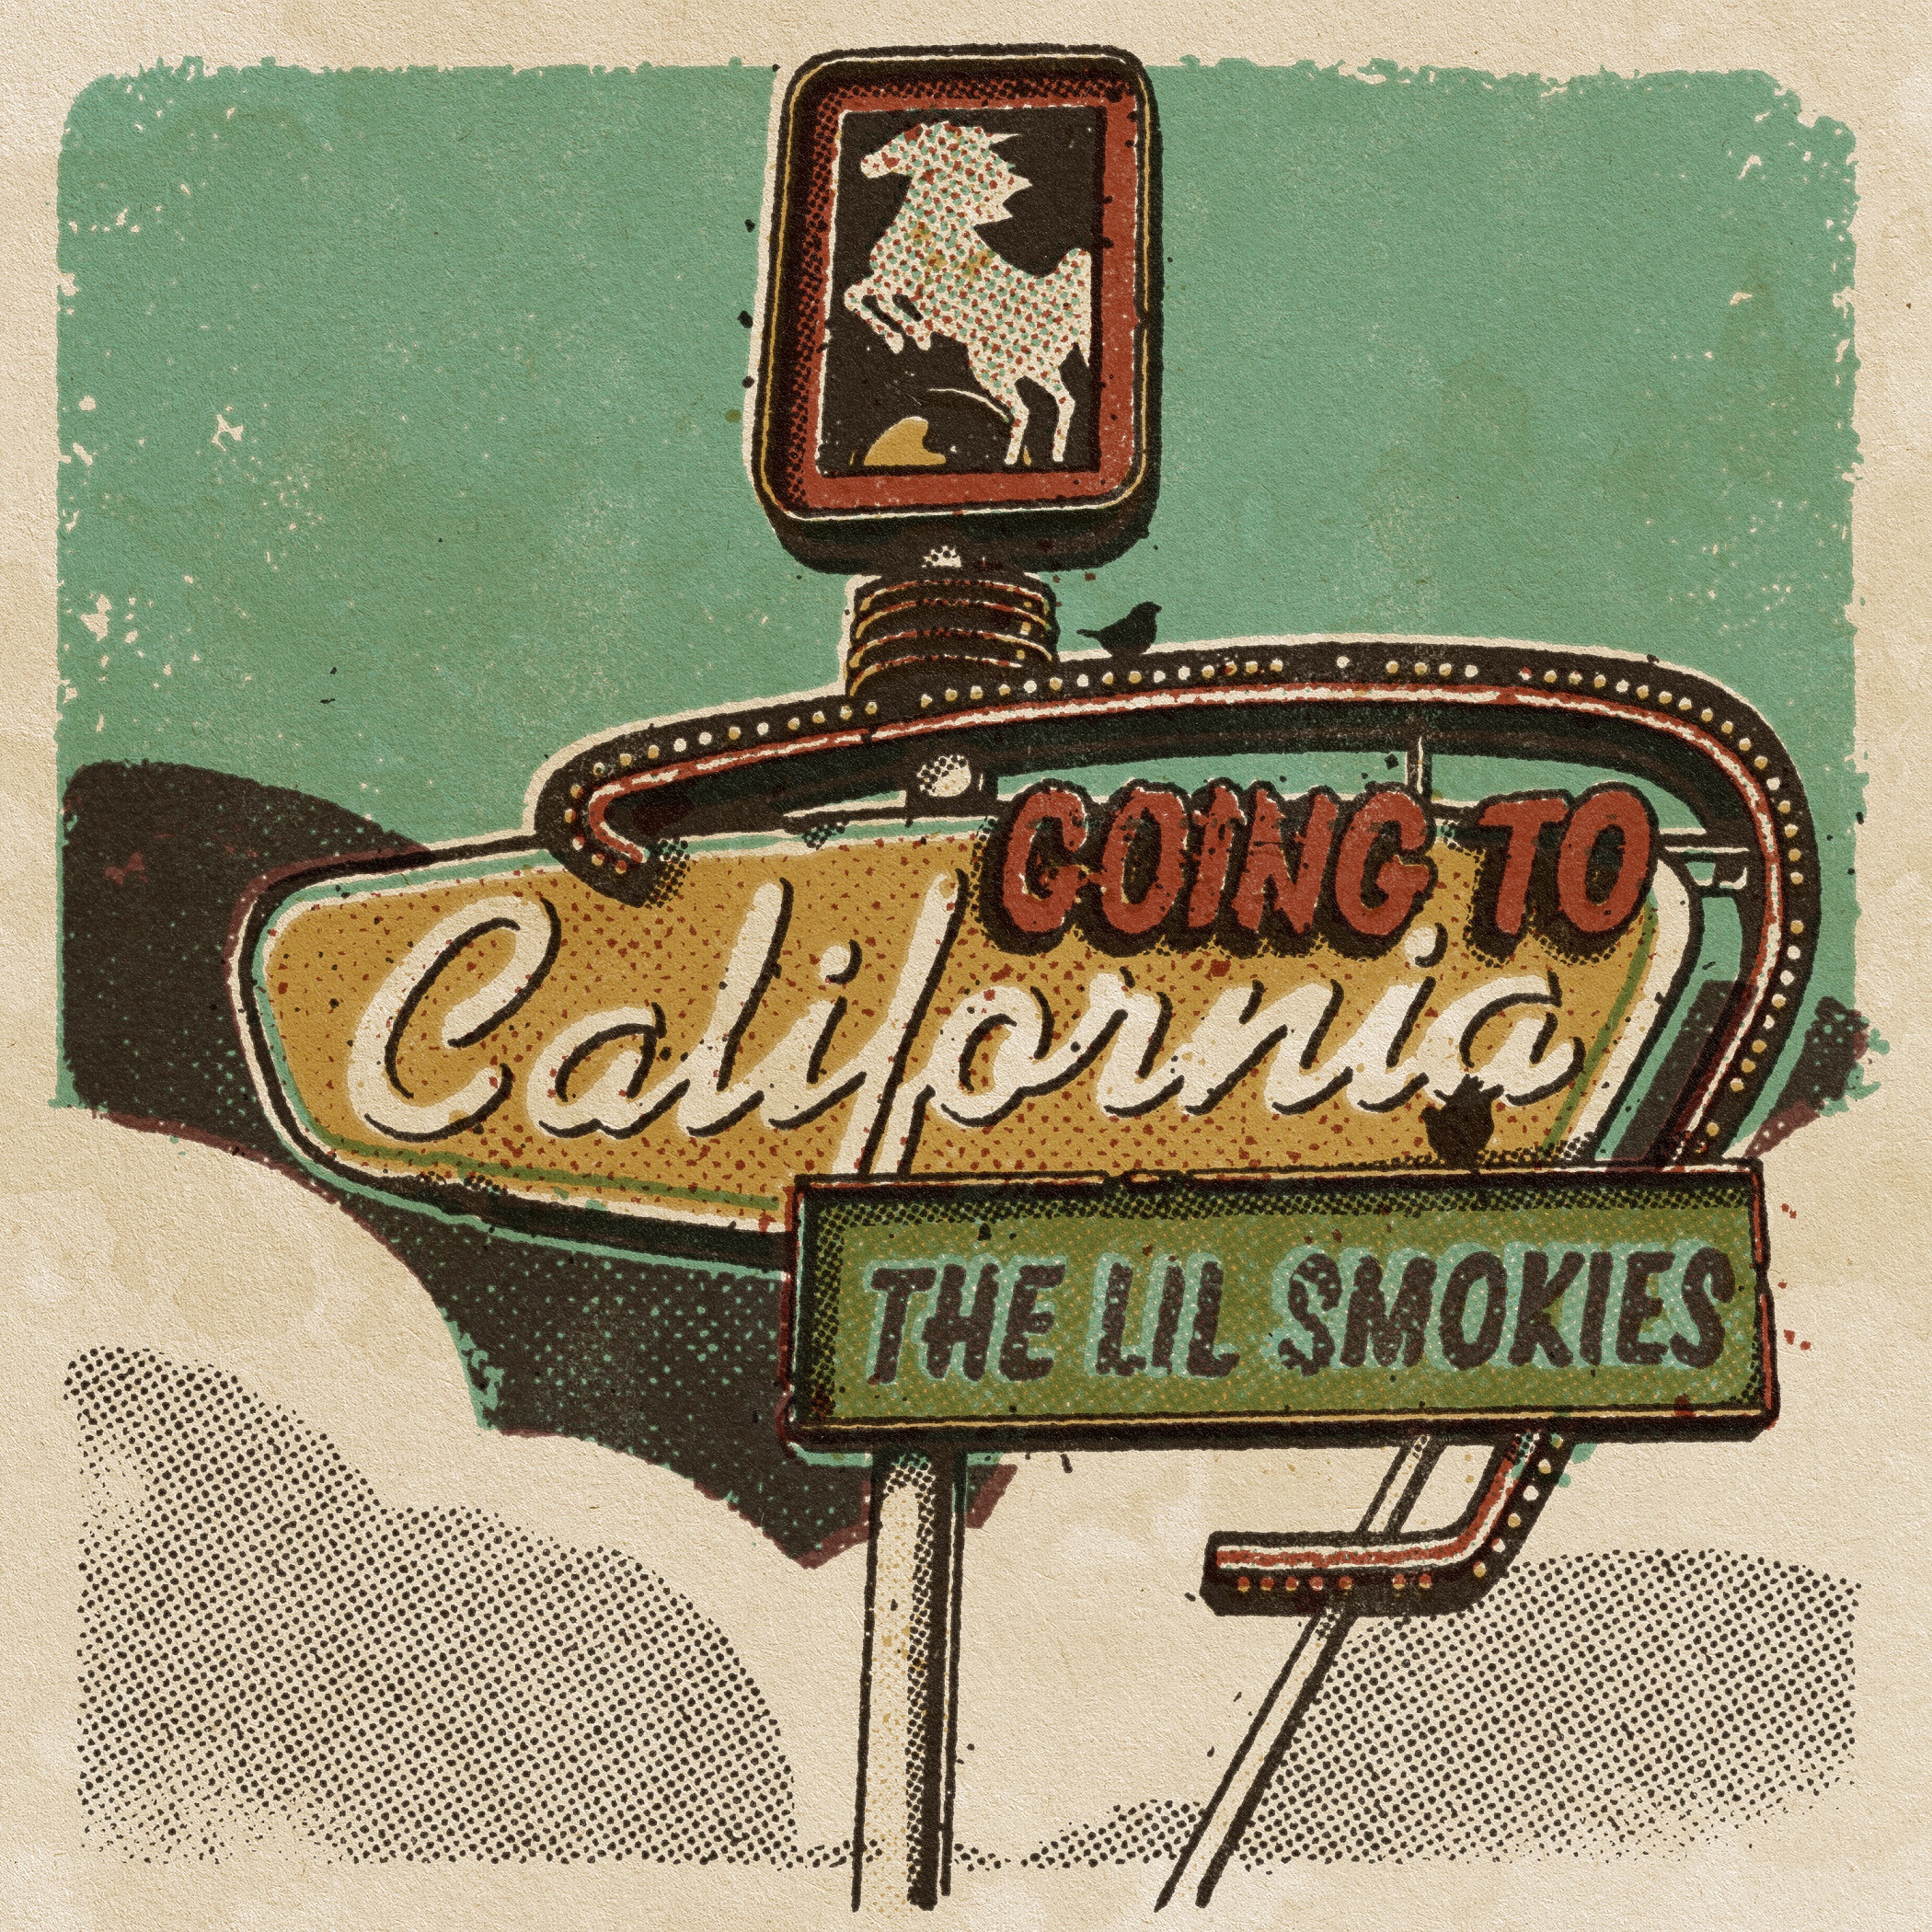 The Lil Smokies Announce Release of "Going to California"